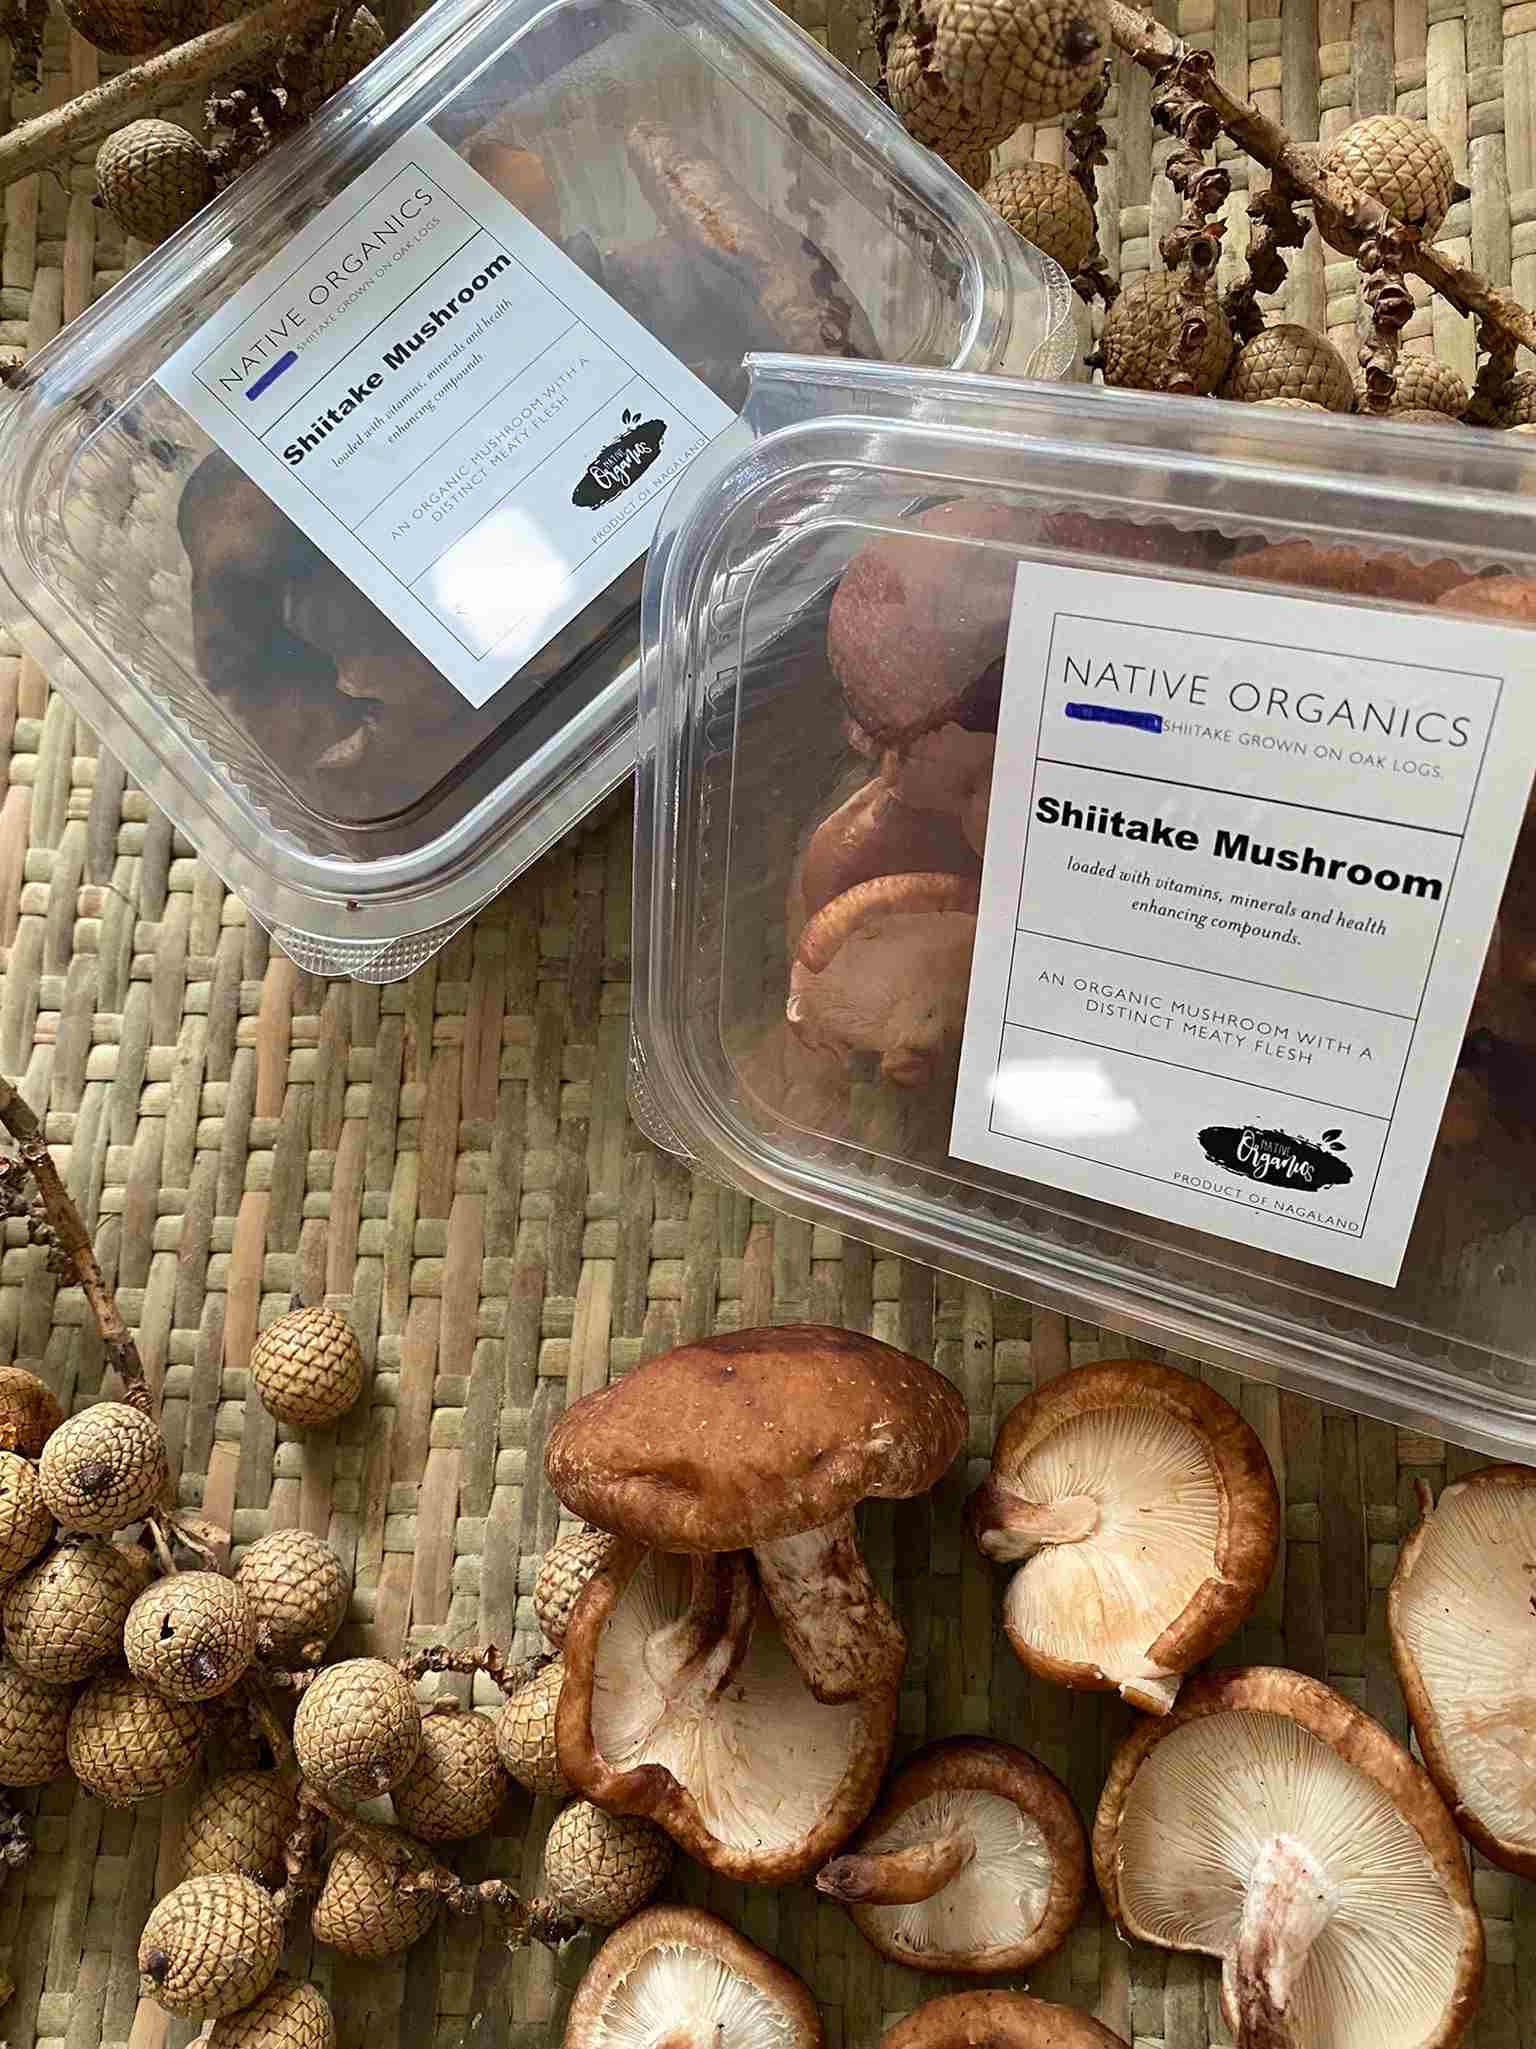 Shiitake mushroom products by Native Organics are grown organically and through a technique called pollarding